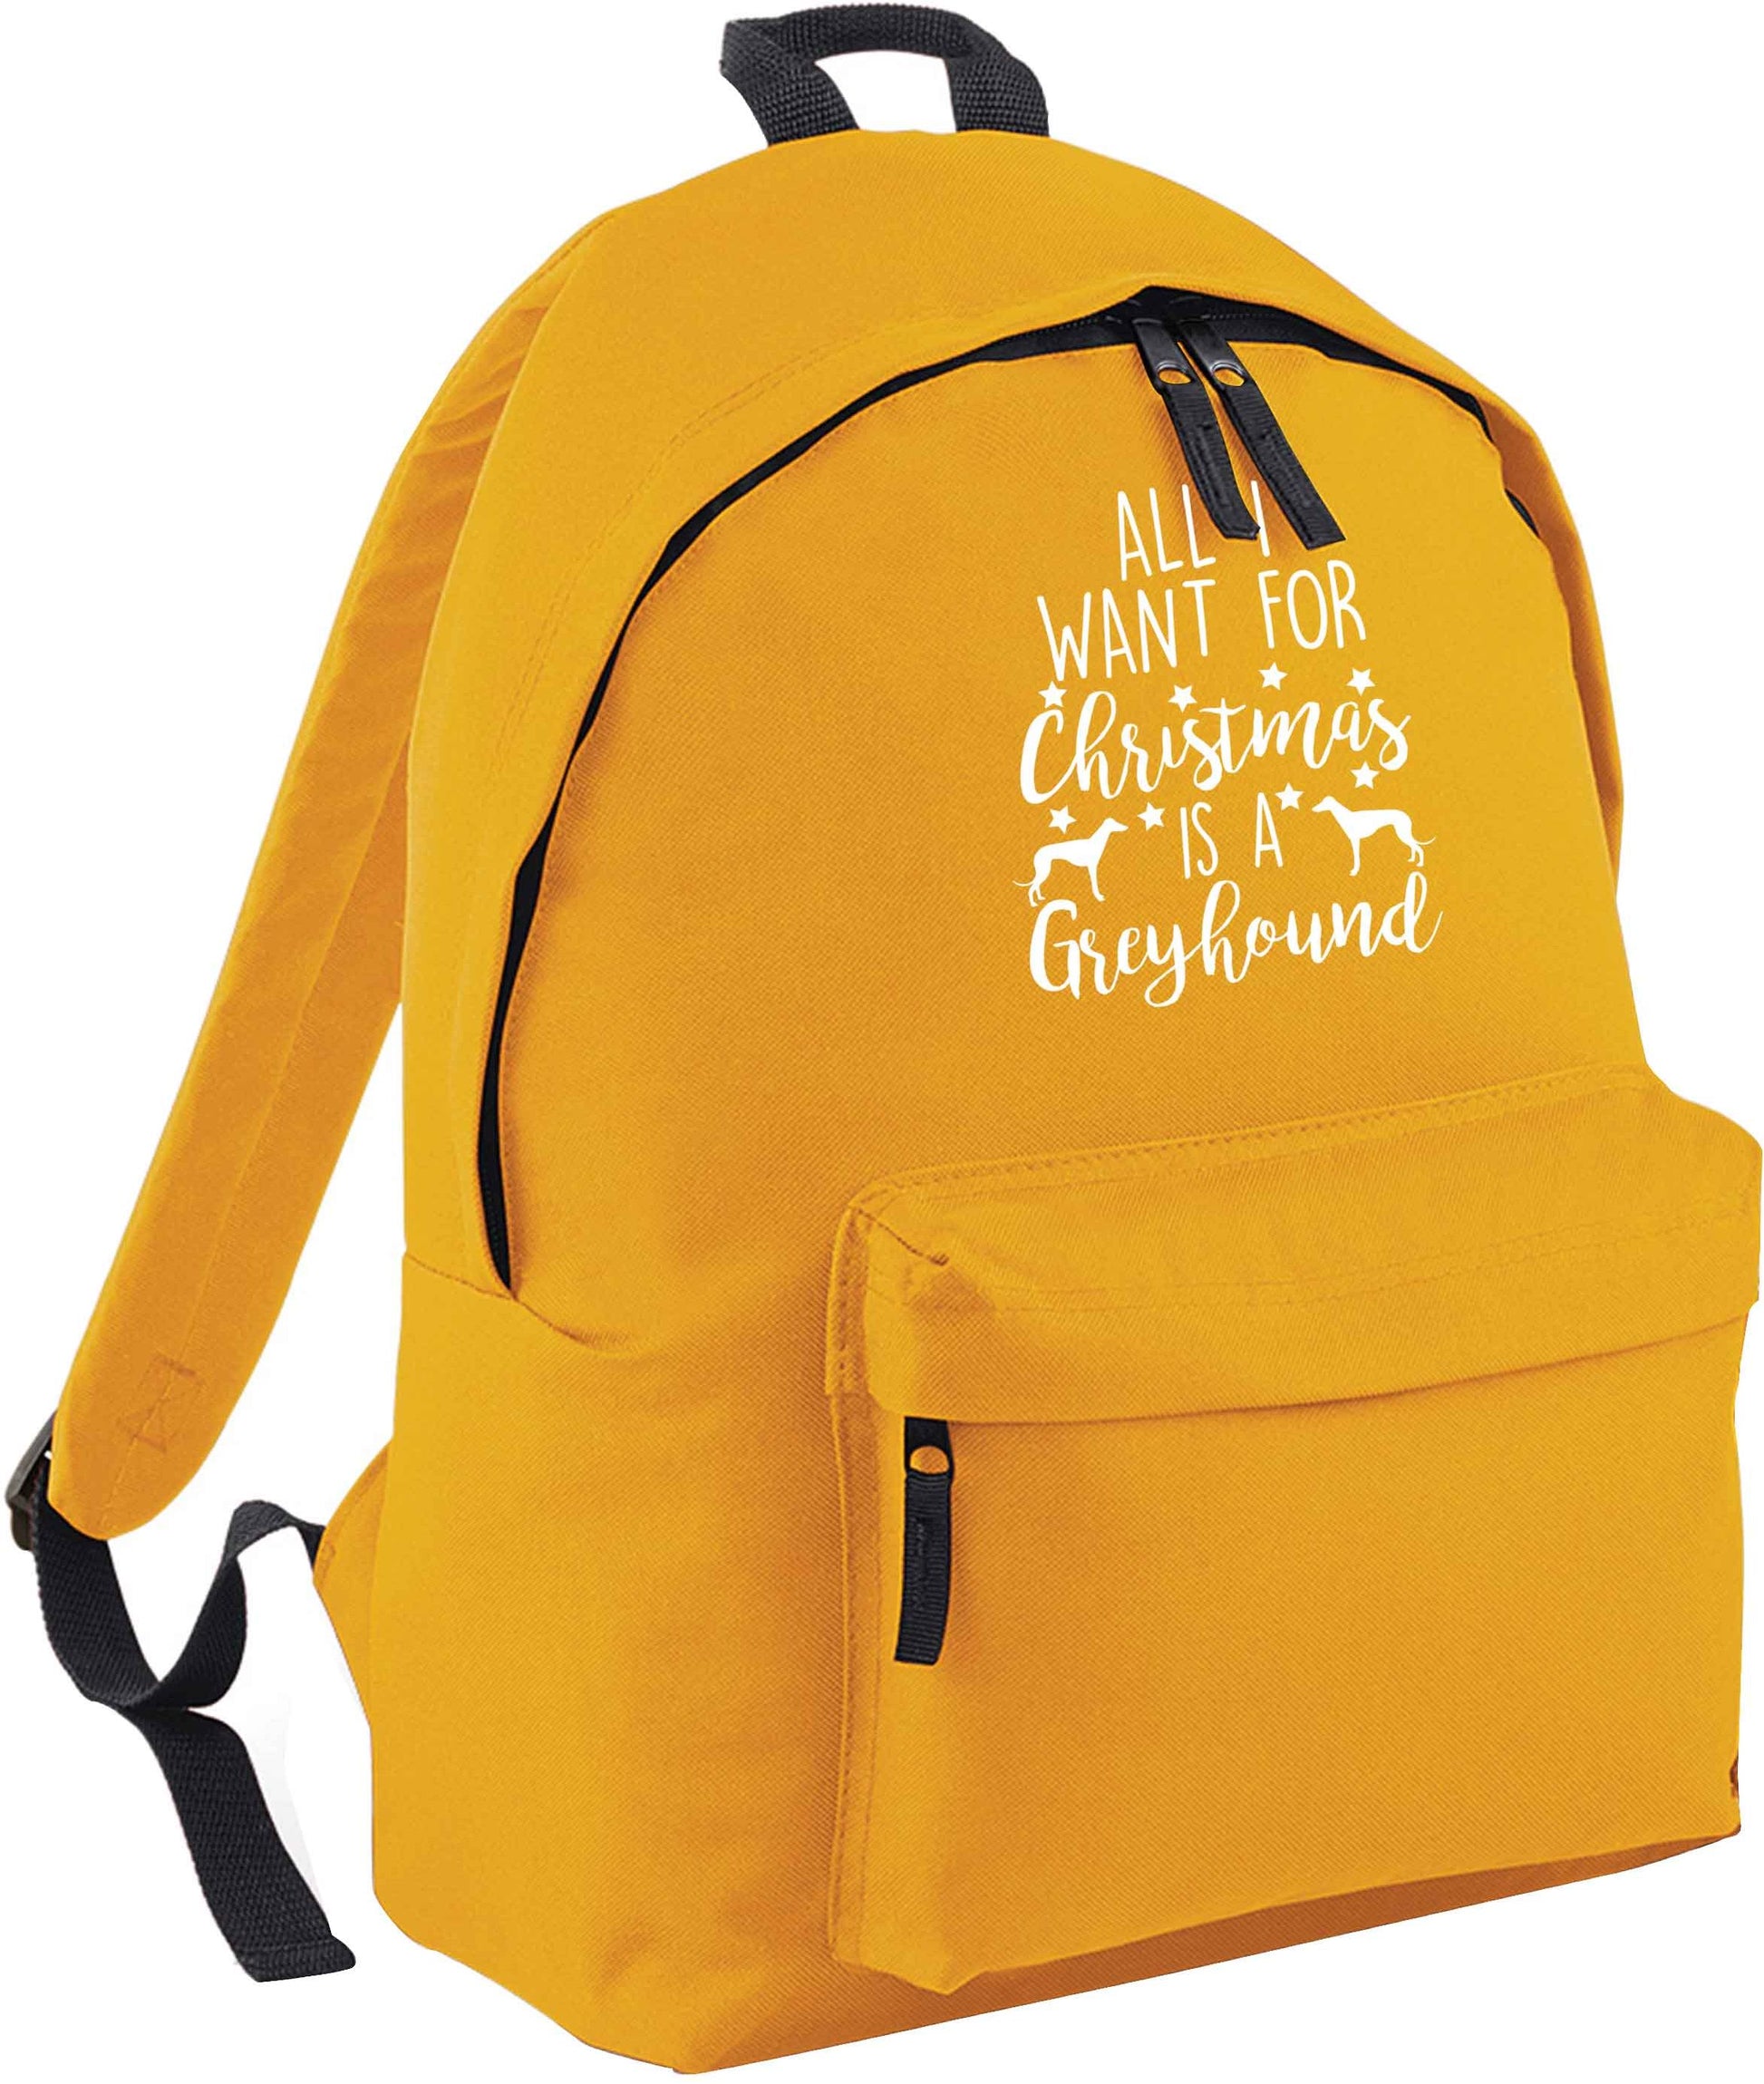 All I want for Christmas is a greyhound mustard adults backpack